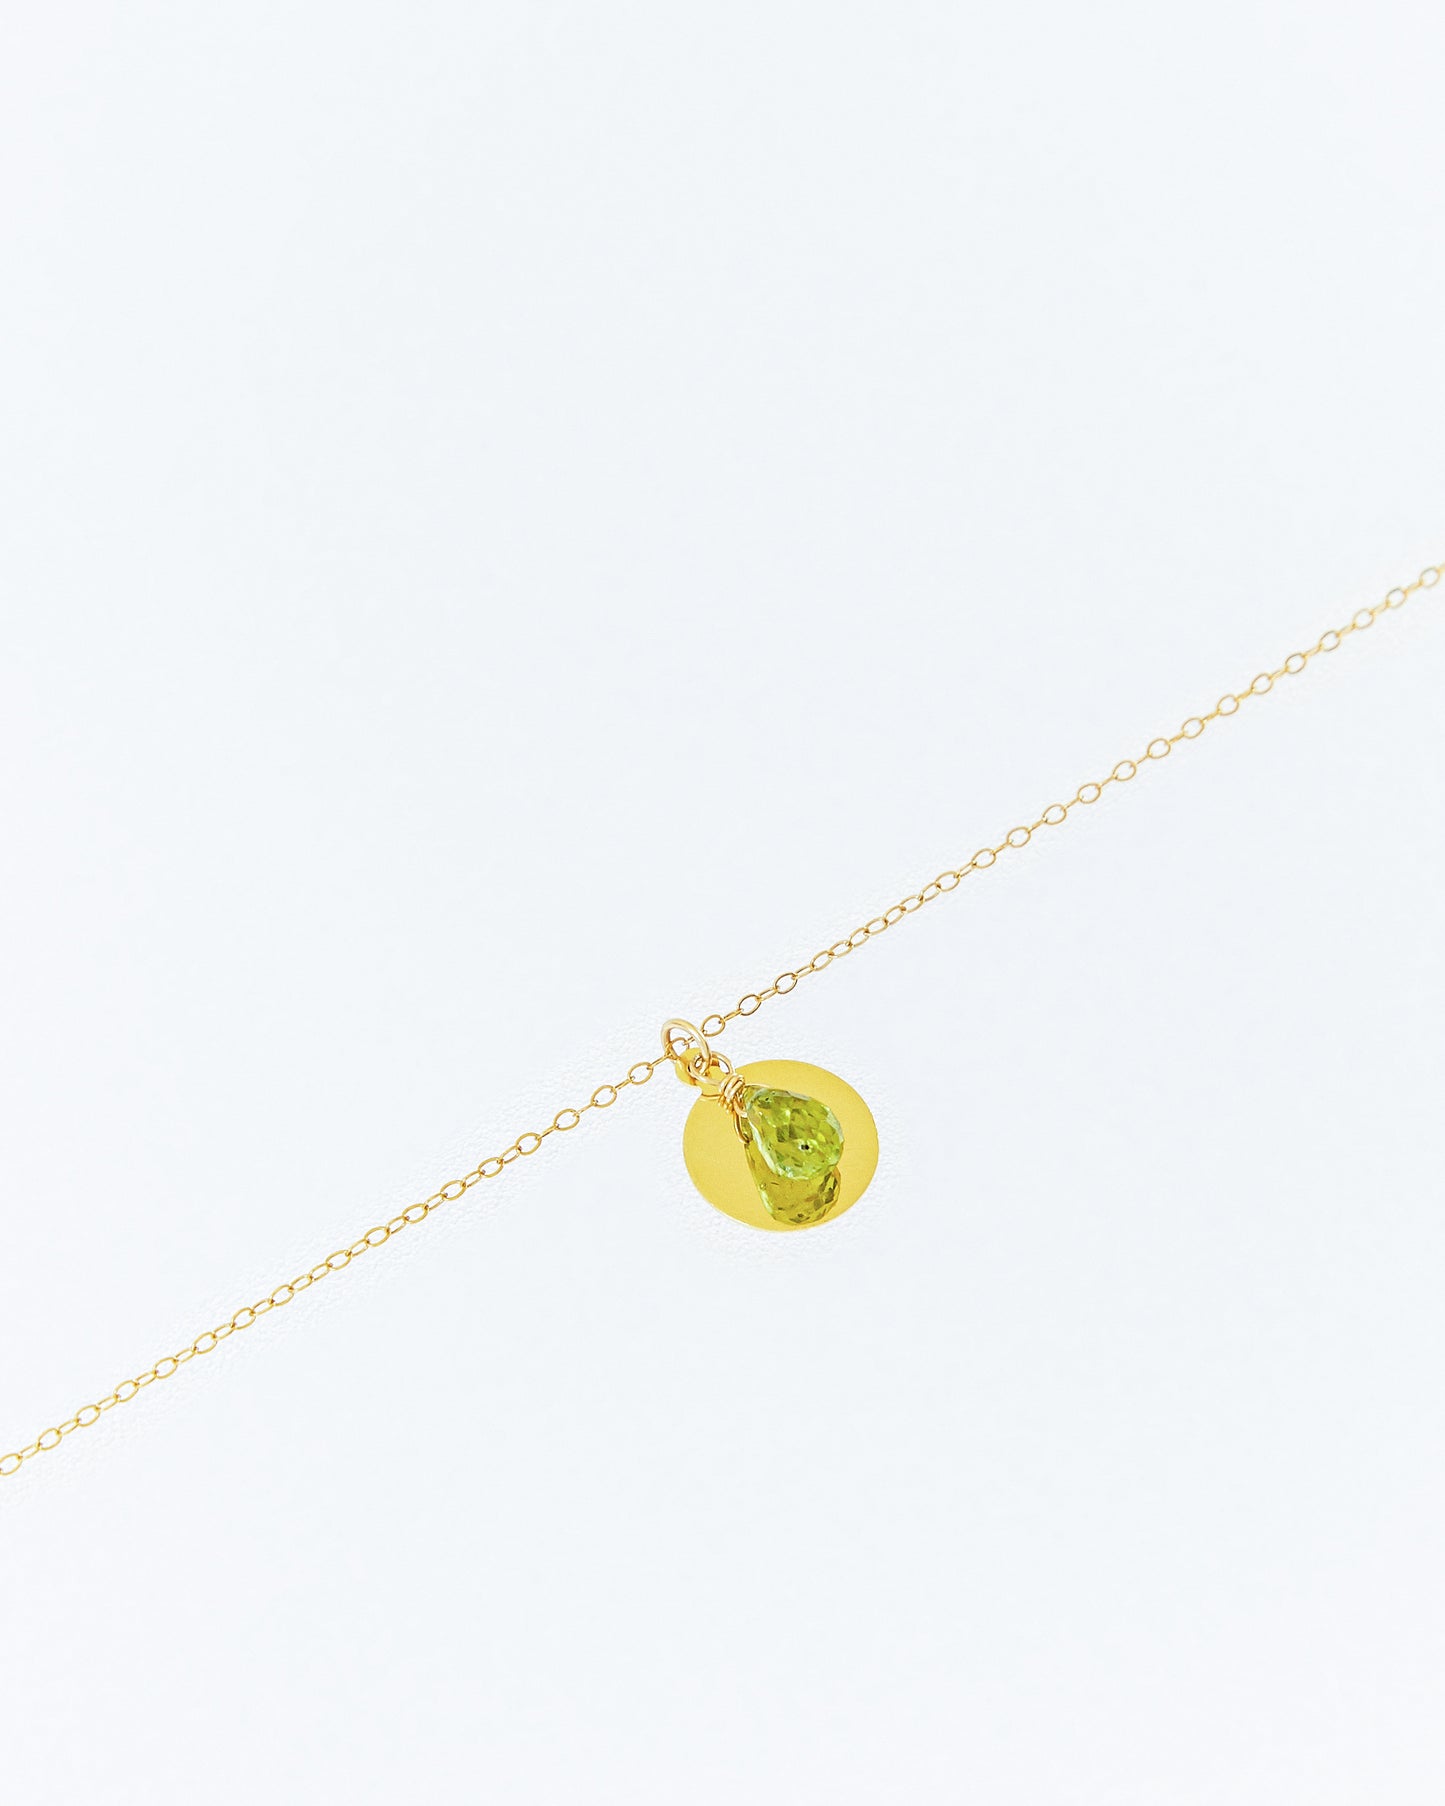 14K Gold Filled Peridot Necklace | Inspiration Her Jewellery